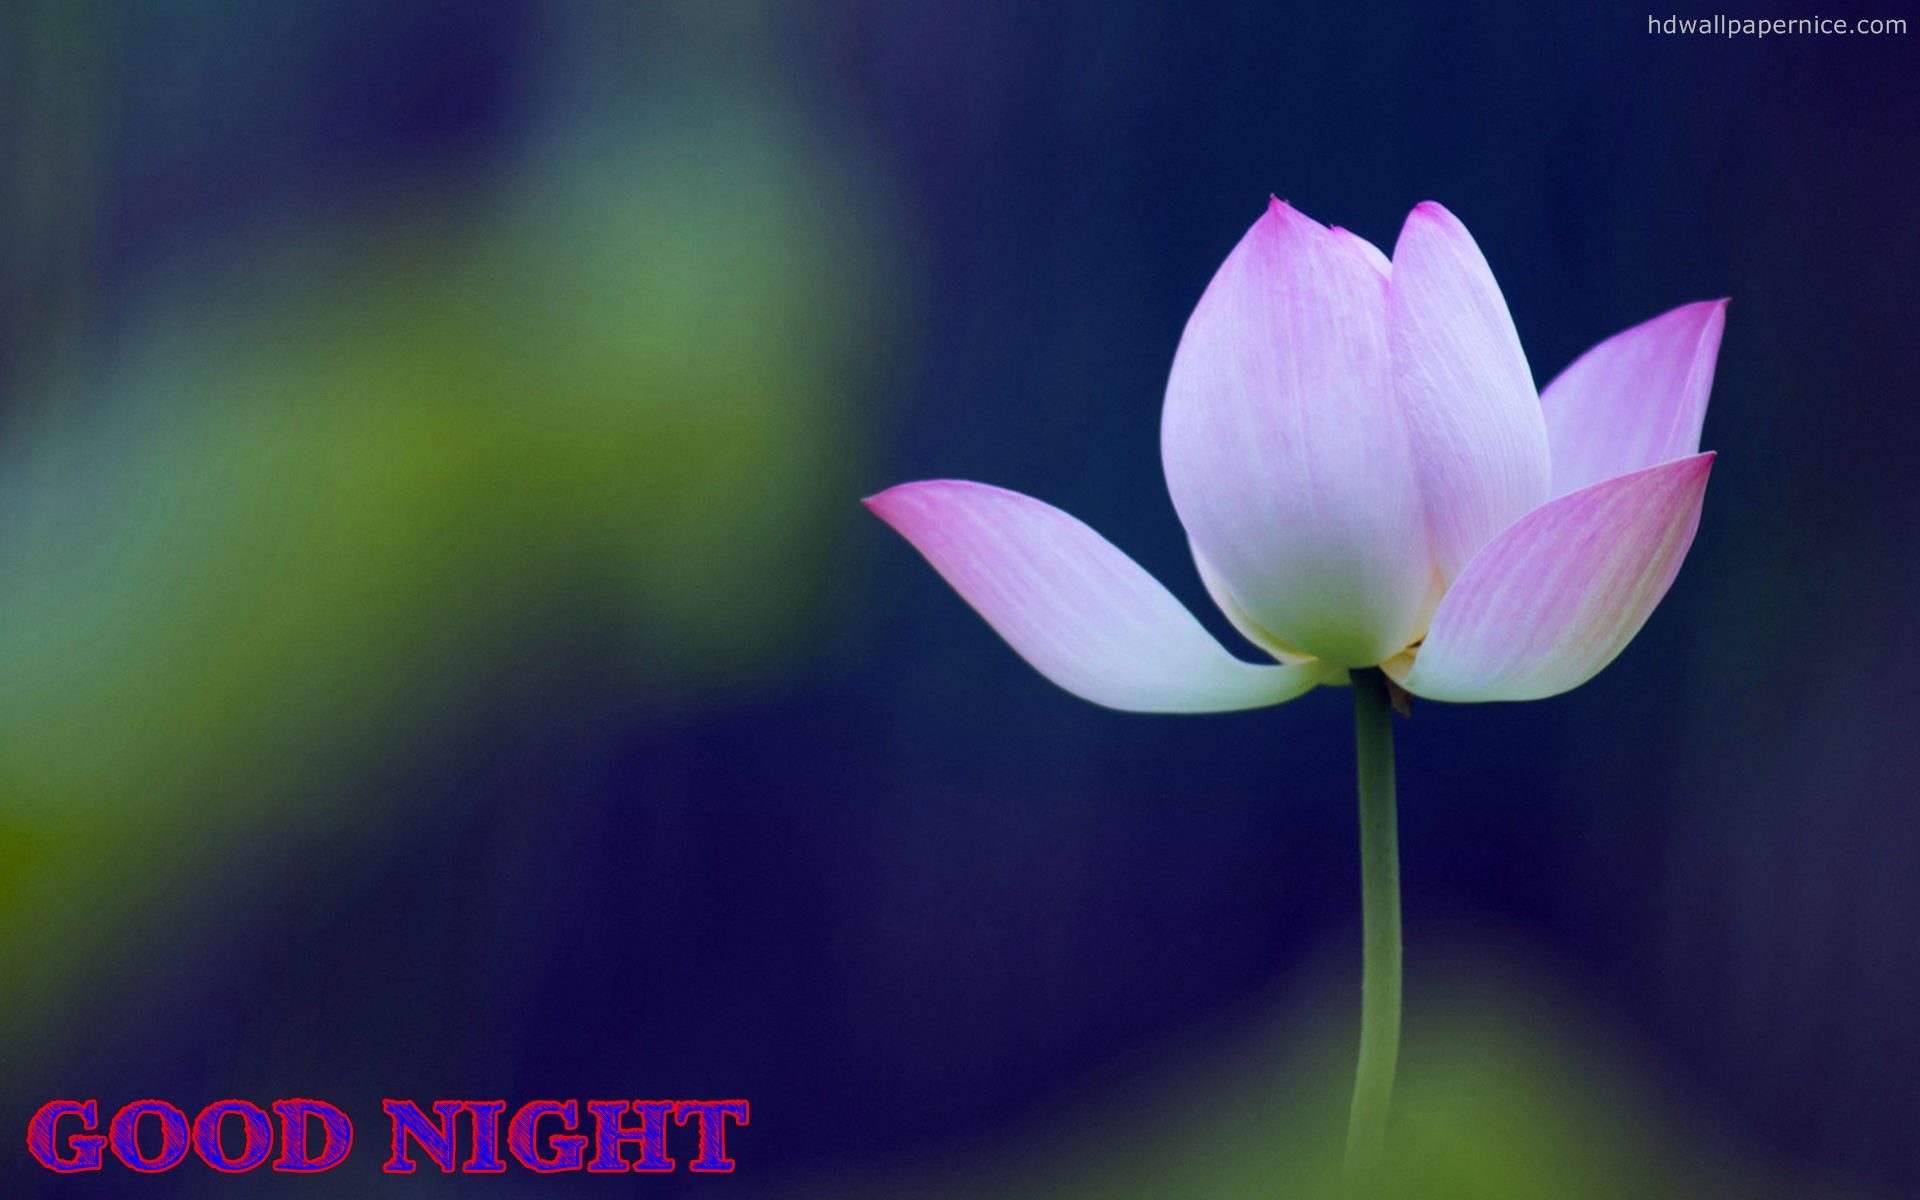 Gud Nite Wallpaper - Good Night Images With Flowers , HD Wallpaper & Backgrounds